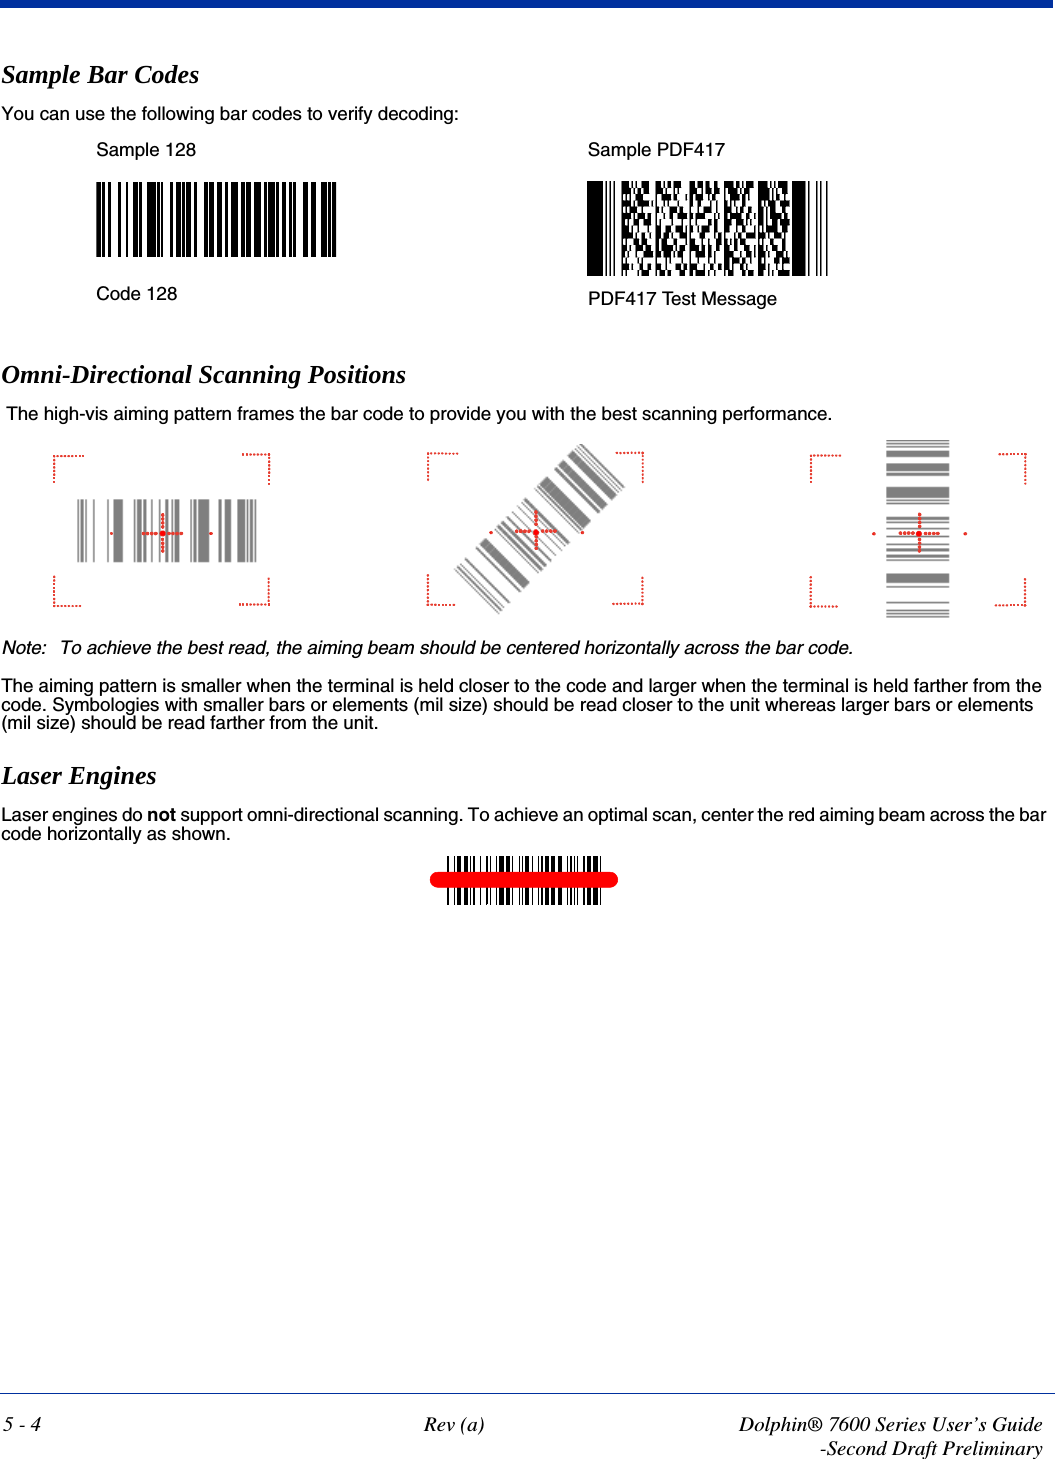 5 - 4 Rev (a) Dolphin® 7600 Series User’s Guide-Second Draft PreliminarySample Bar CodesYou can use the following bar codes to verify decoding:Omni-Directional Scanning Positions The high-vis aiming pattern frames the bar code to provide you with the best scanning performance. Note: To achieve the best read, the aiming beam should be centered horizontally across the bar code. The aiming pattern is smaller when the terminal is held closer to the code and larger when the terminal is held farther from the code. Symbologies with smaller bars or elements (mil size) should be read closer to the unit whereas larger bars or elements (mil size) should be read farther from the unit.Laser EnginesLaser engines do not support omni-directional scanning. To achieve an optimal scan, center the red aiming beam across the bar code horizontally as shown.Sample 128 Sample PDF417Code 128 PDF417 Test Message